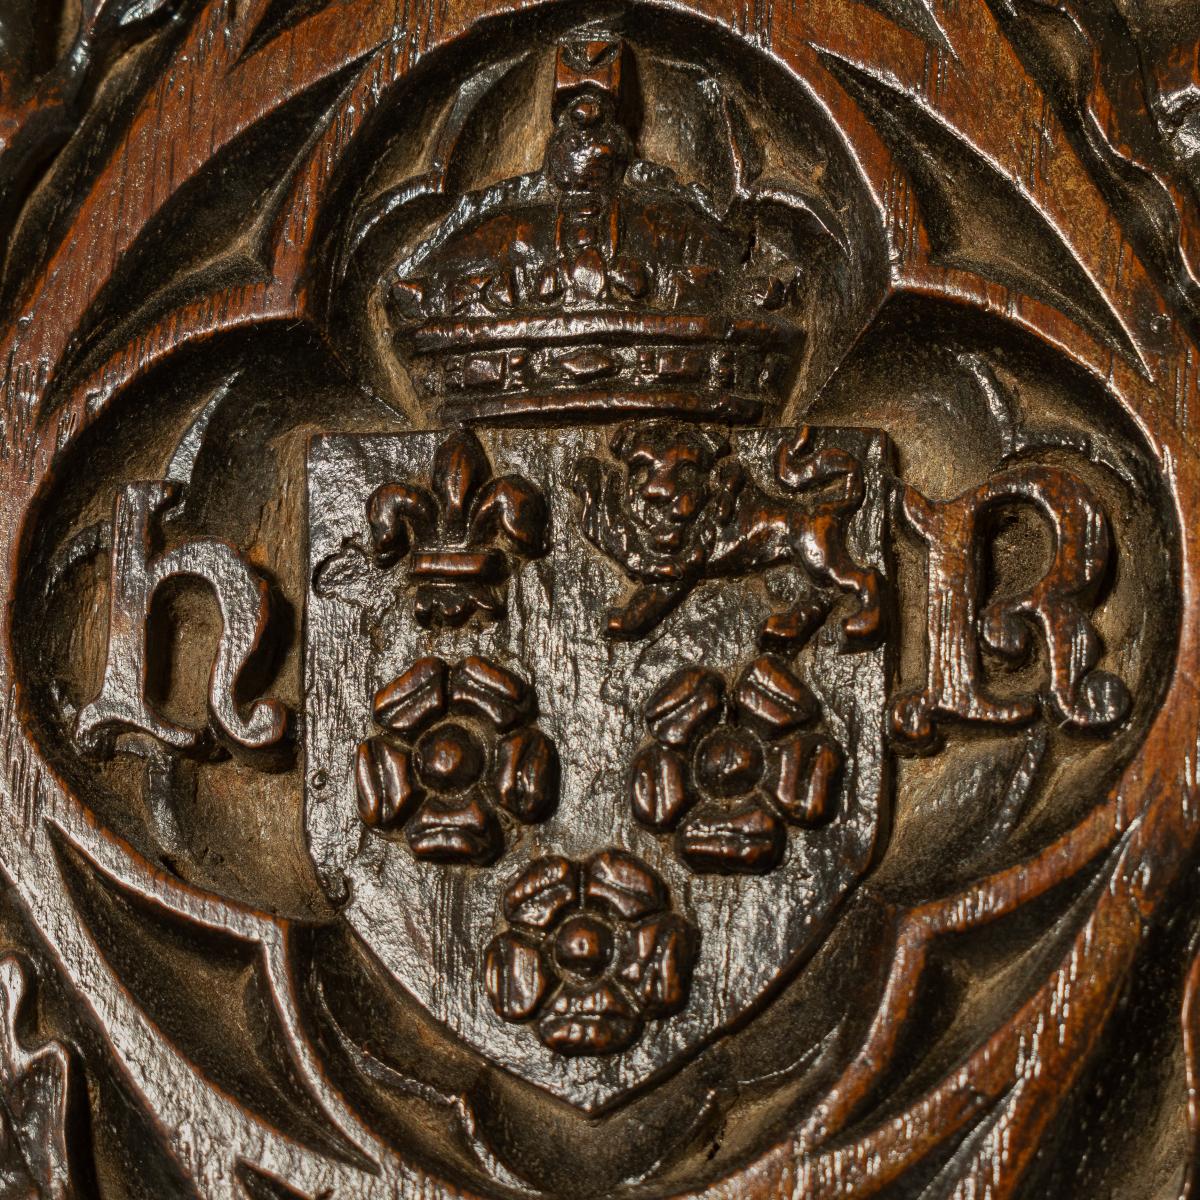 King's College Cambridge: A Henry VII/VIII oak panel, carved with the college arms and royal cypher, circa 1505-37